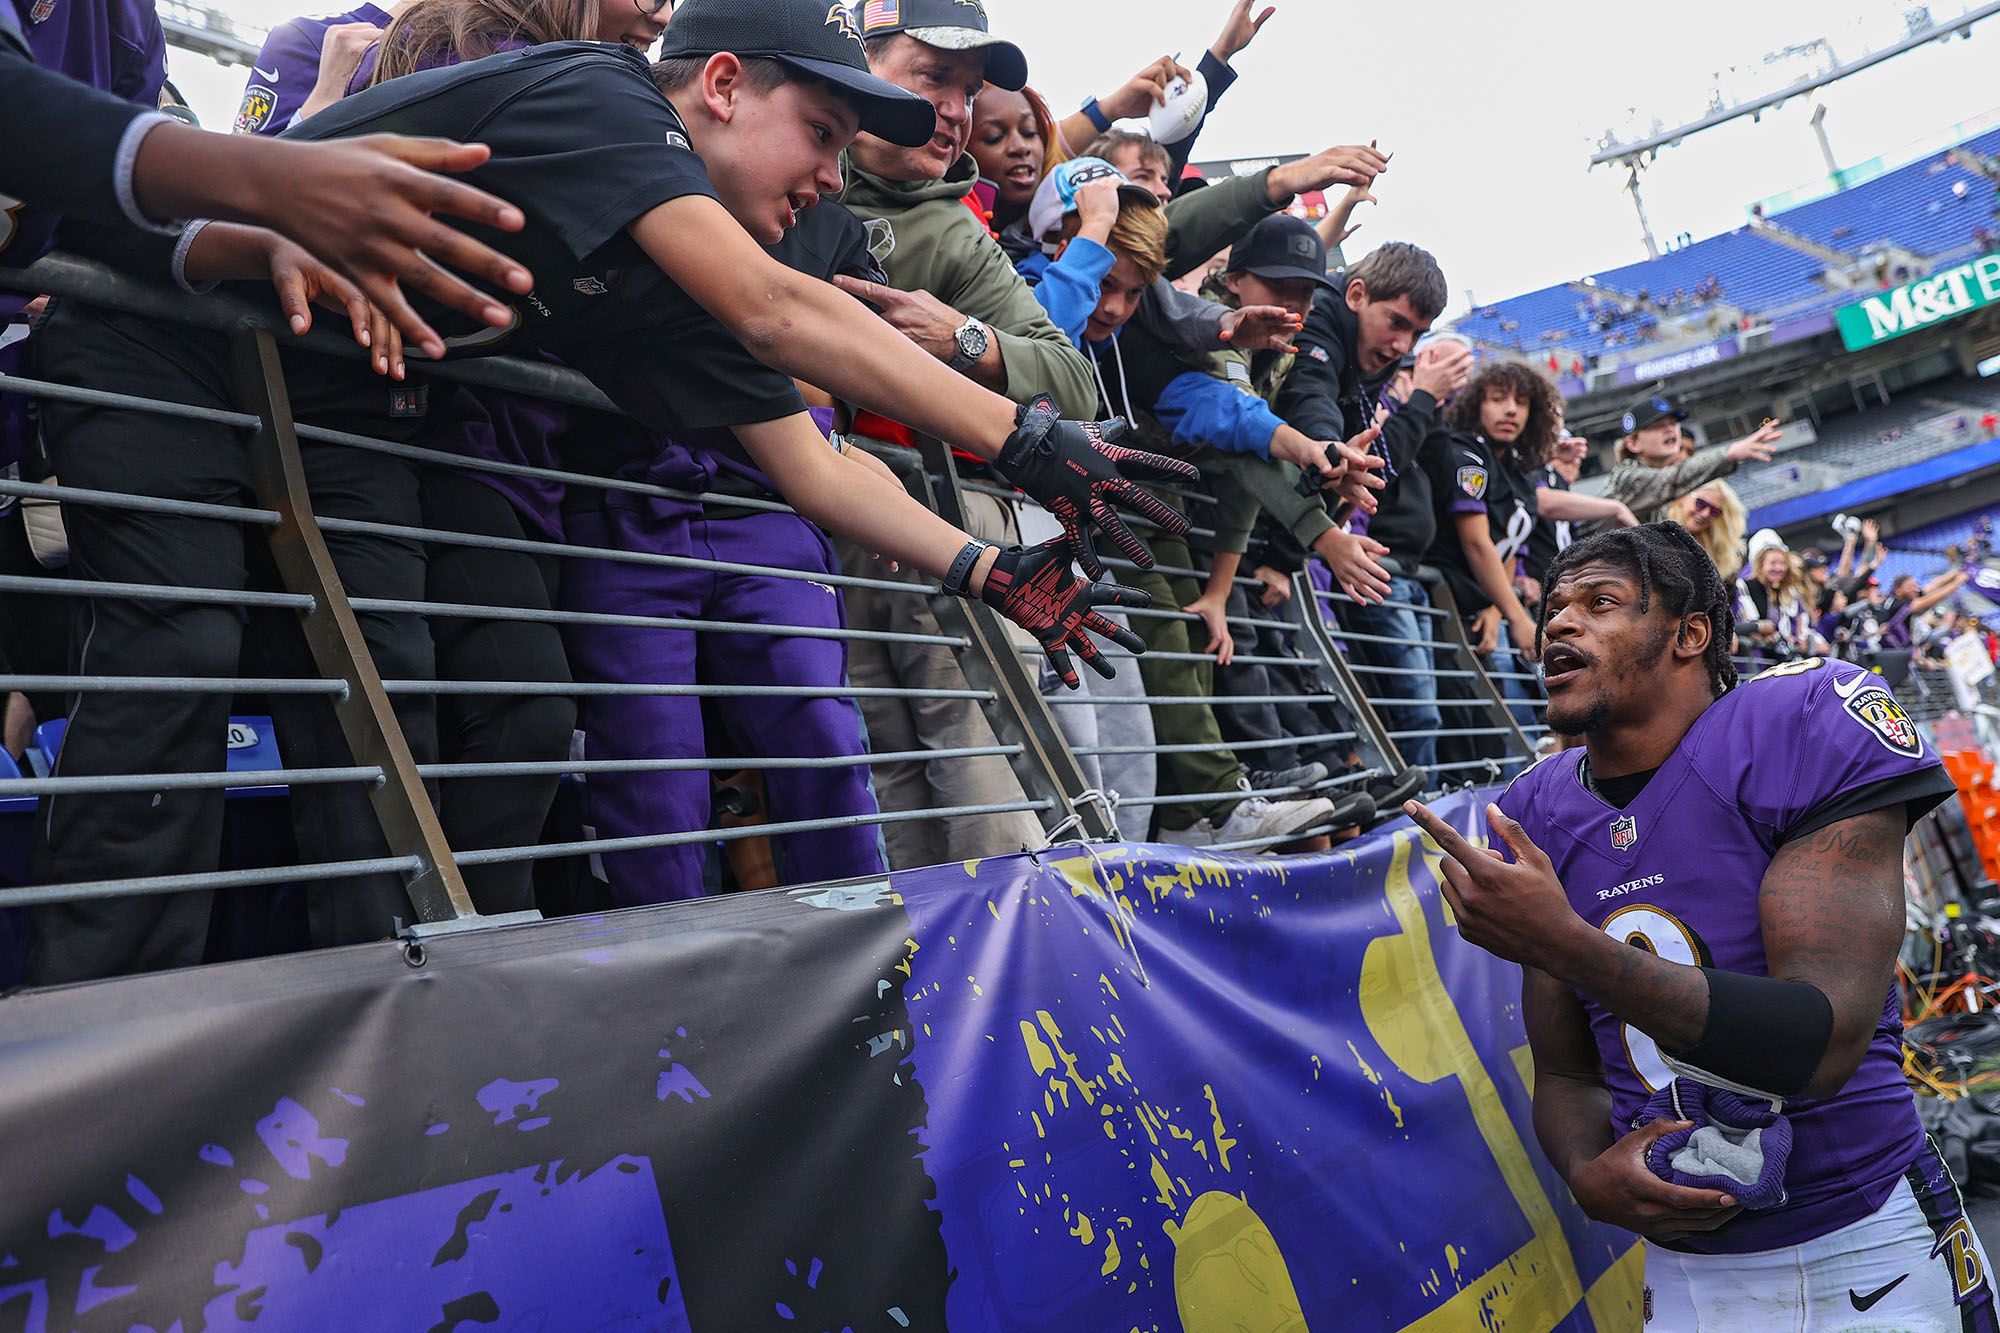 Lamar Jackson Says He Wanted to 'Finish It' and Win With Ravens